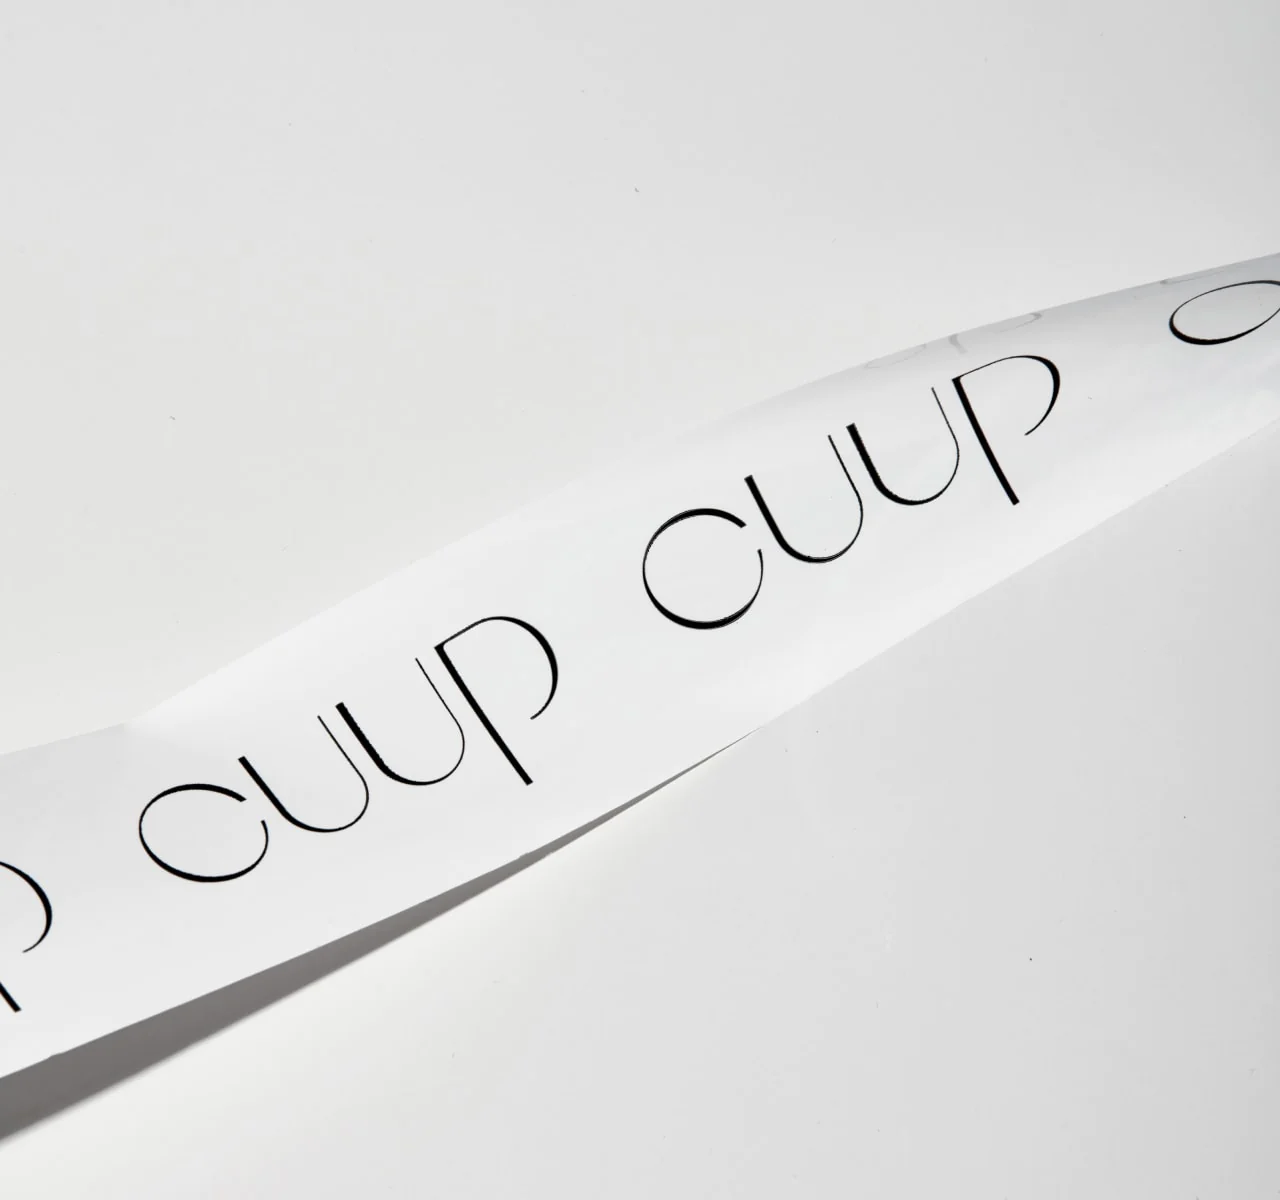 CUUP - About Us